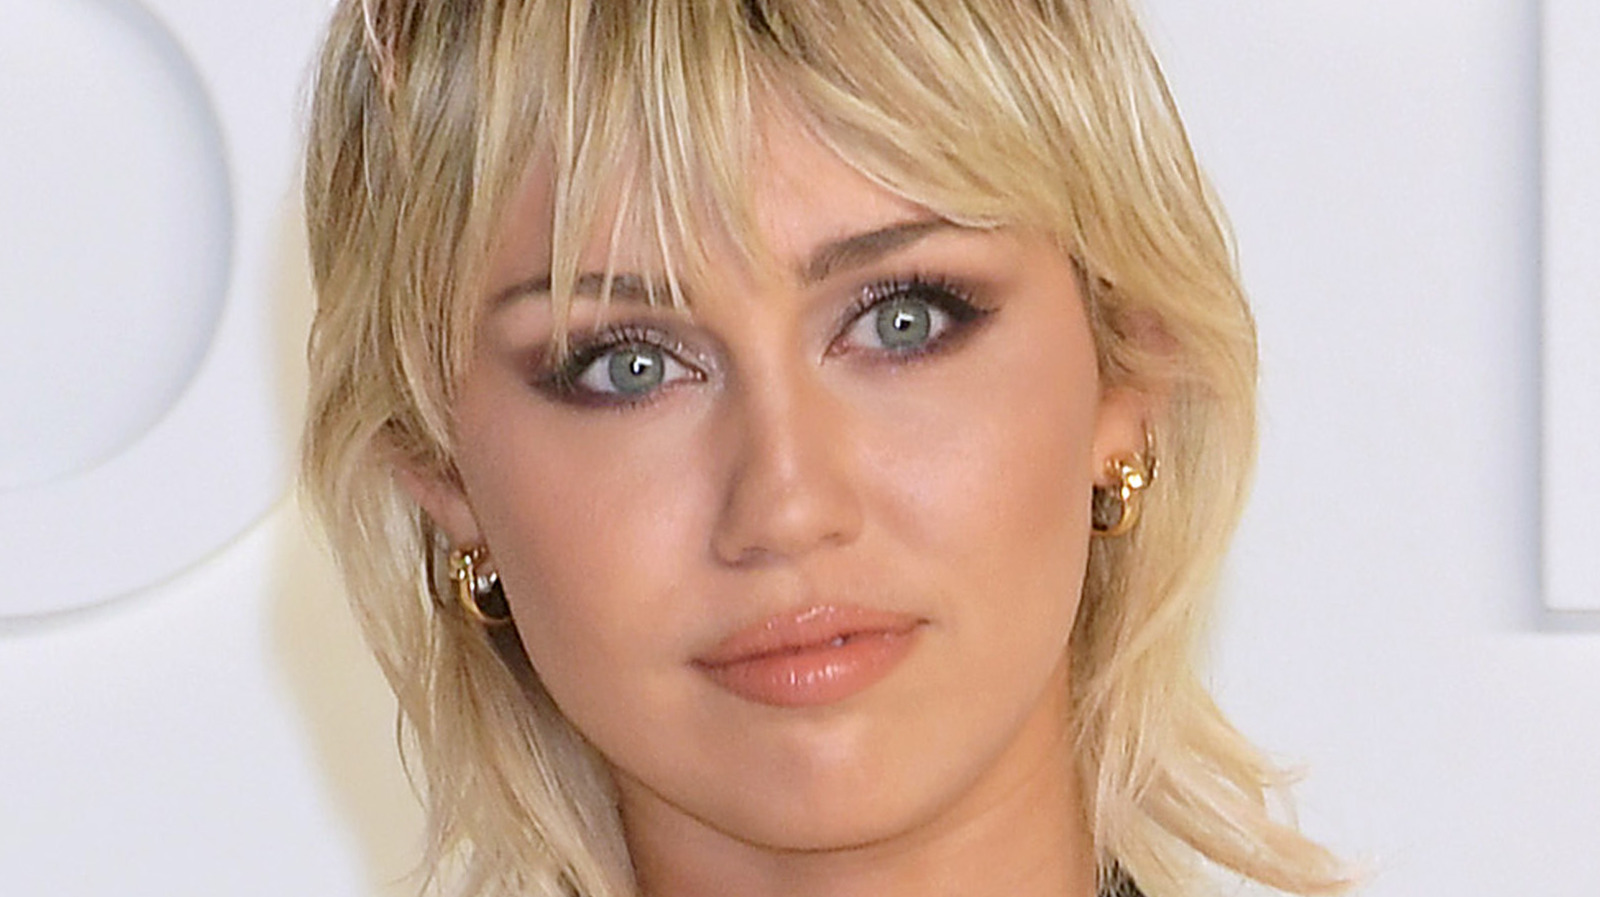 Here's why retailers don't have copies of Miley Cyrus' 'Plastic Hearts